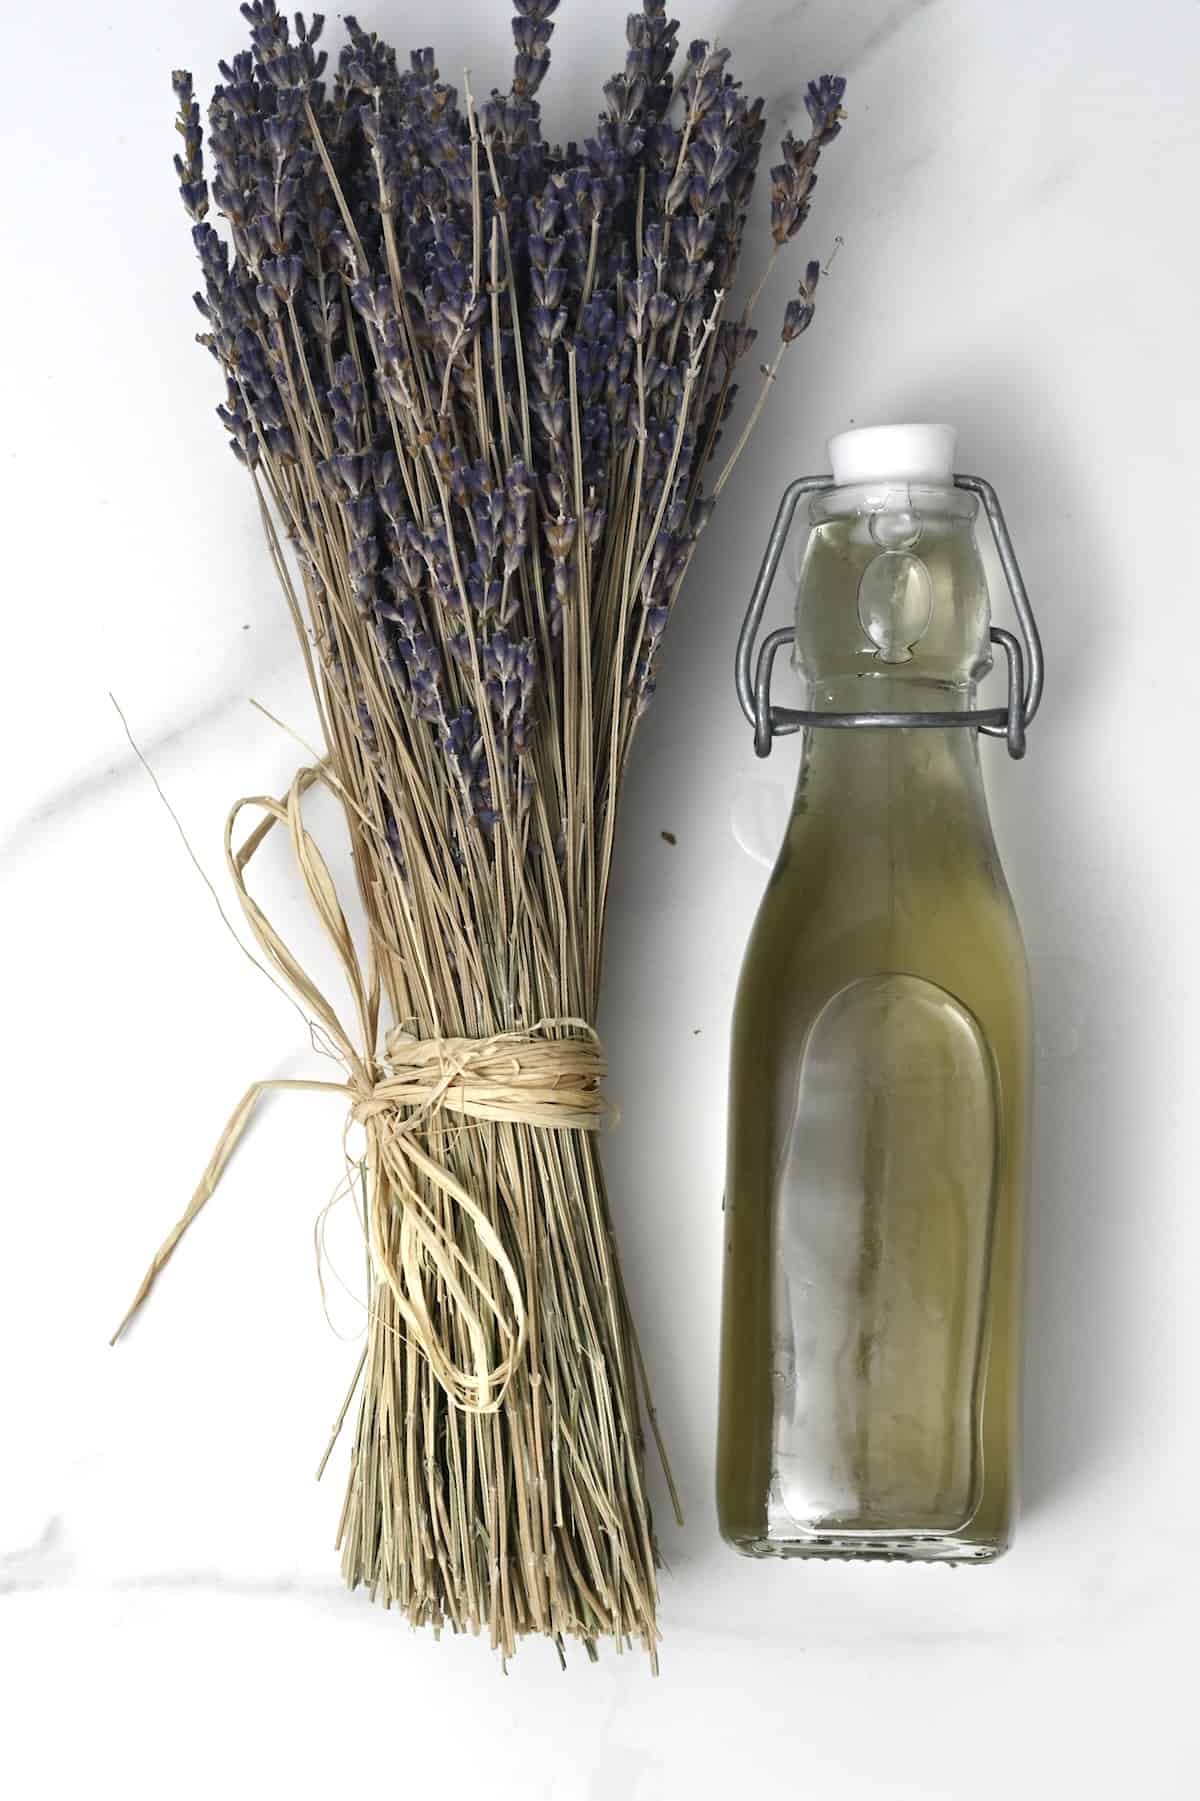 Sugar syrup made with lavender in a bottle